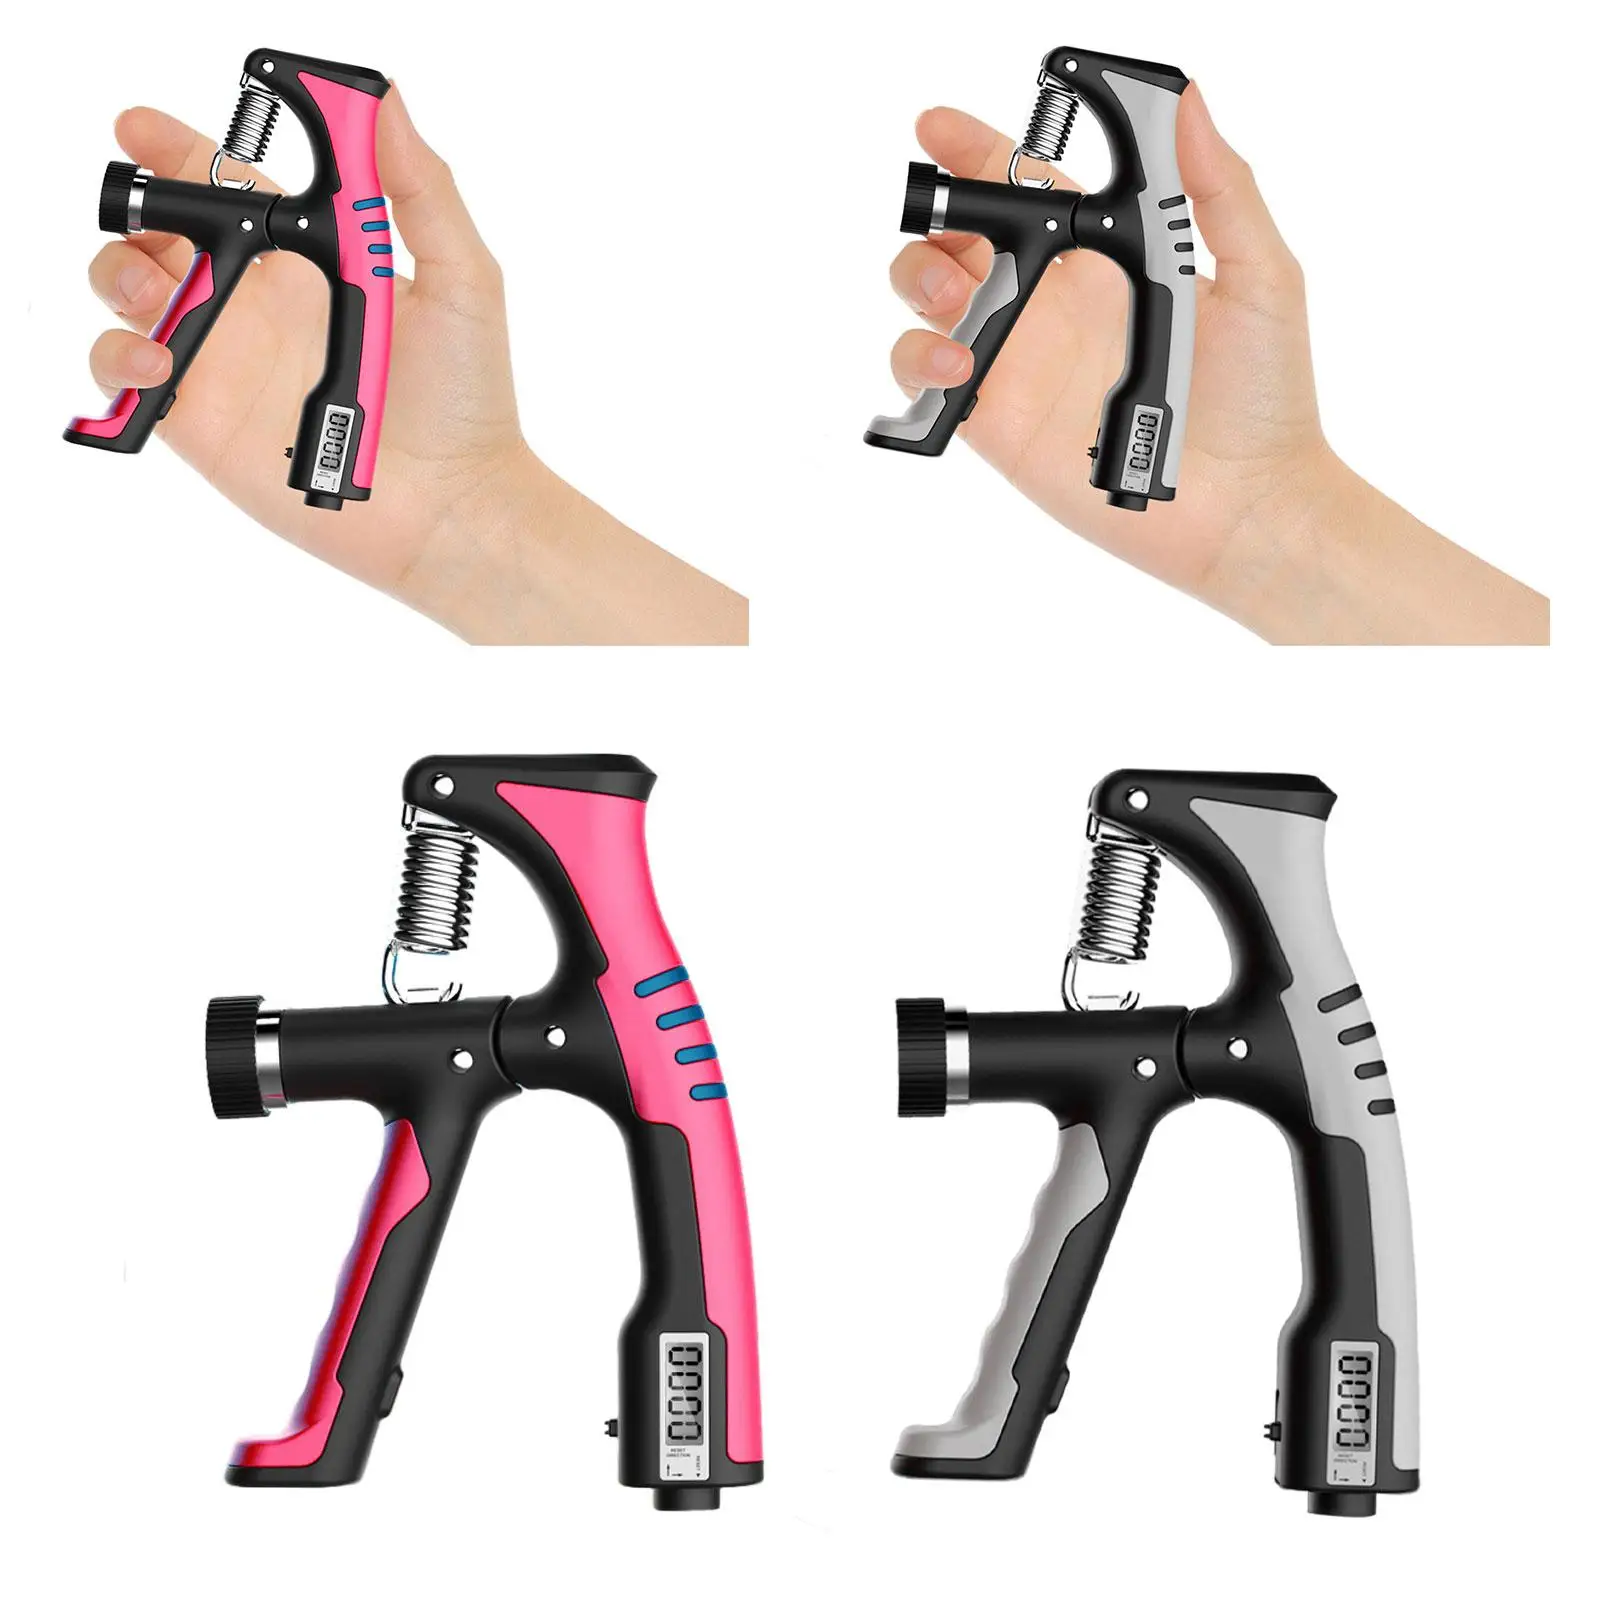 Hand Grip Strengthener Adjustable Resistance Heavy Duty Workout with Counter for Guitar Men Women Beginners Player Athlete